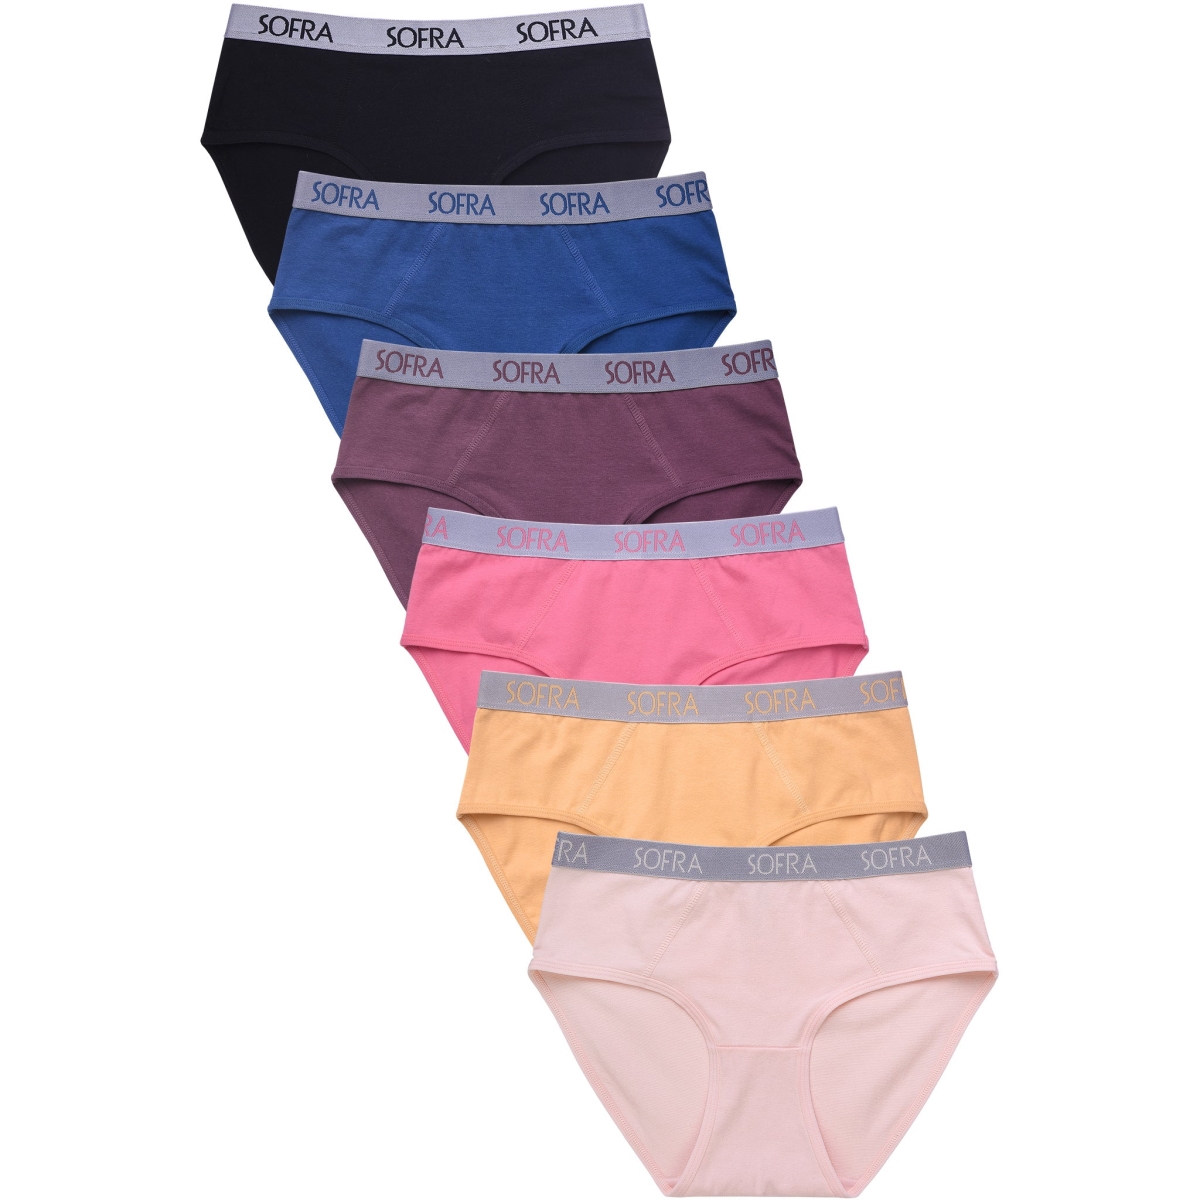 Picture of 247 Frenzy 247-LP1421CKE4-SM Womens Essentials Cotton Stretch Bikini Panty Underwear with Extended Side Seams - Assorted Color - Small - Pack of 6